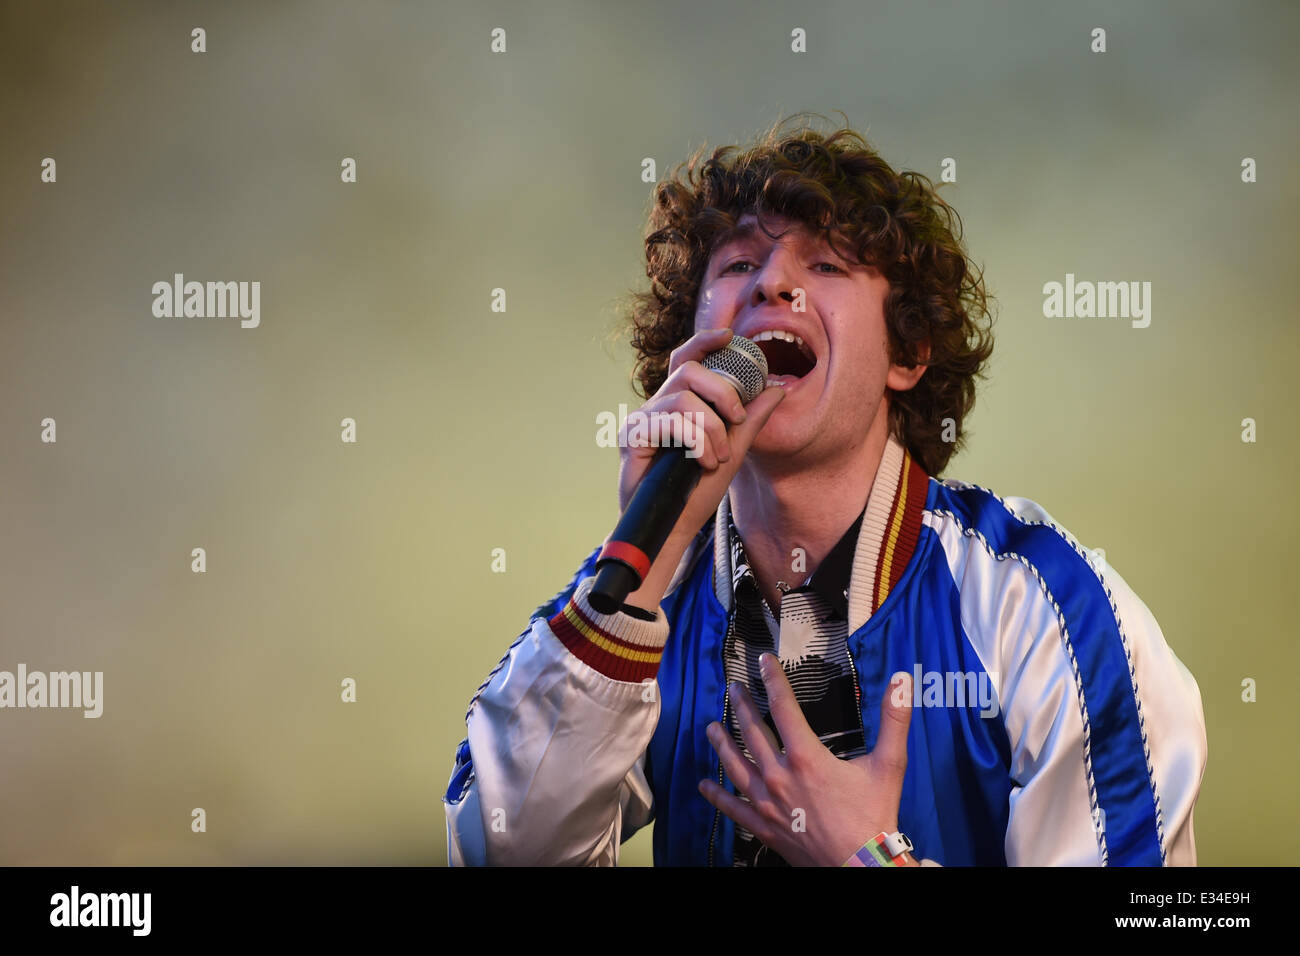 Frontman of the British indie rock band 'The Kooks', Luke Pritchard performs at the Southside Festival in Neuhausen ob Eck, Germany, 21 June 2014. Until the 22 June 2014 60 000 visitors are expected and around 100 bands will perform. Photo: Felix Kaestle/dpa Stock Photo